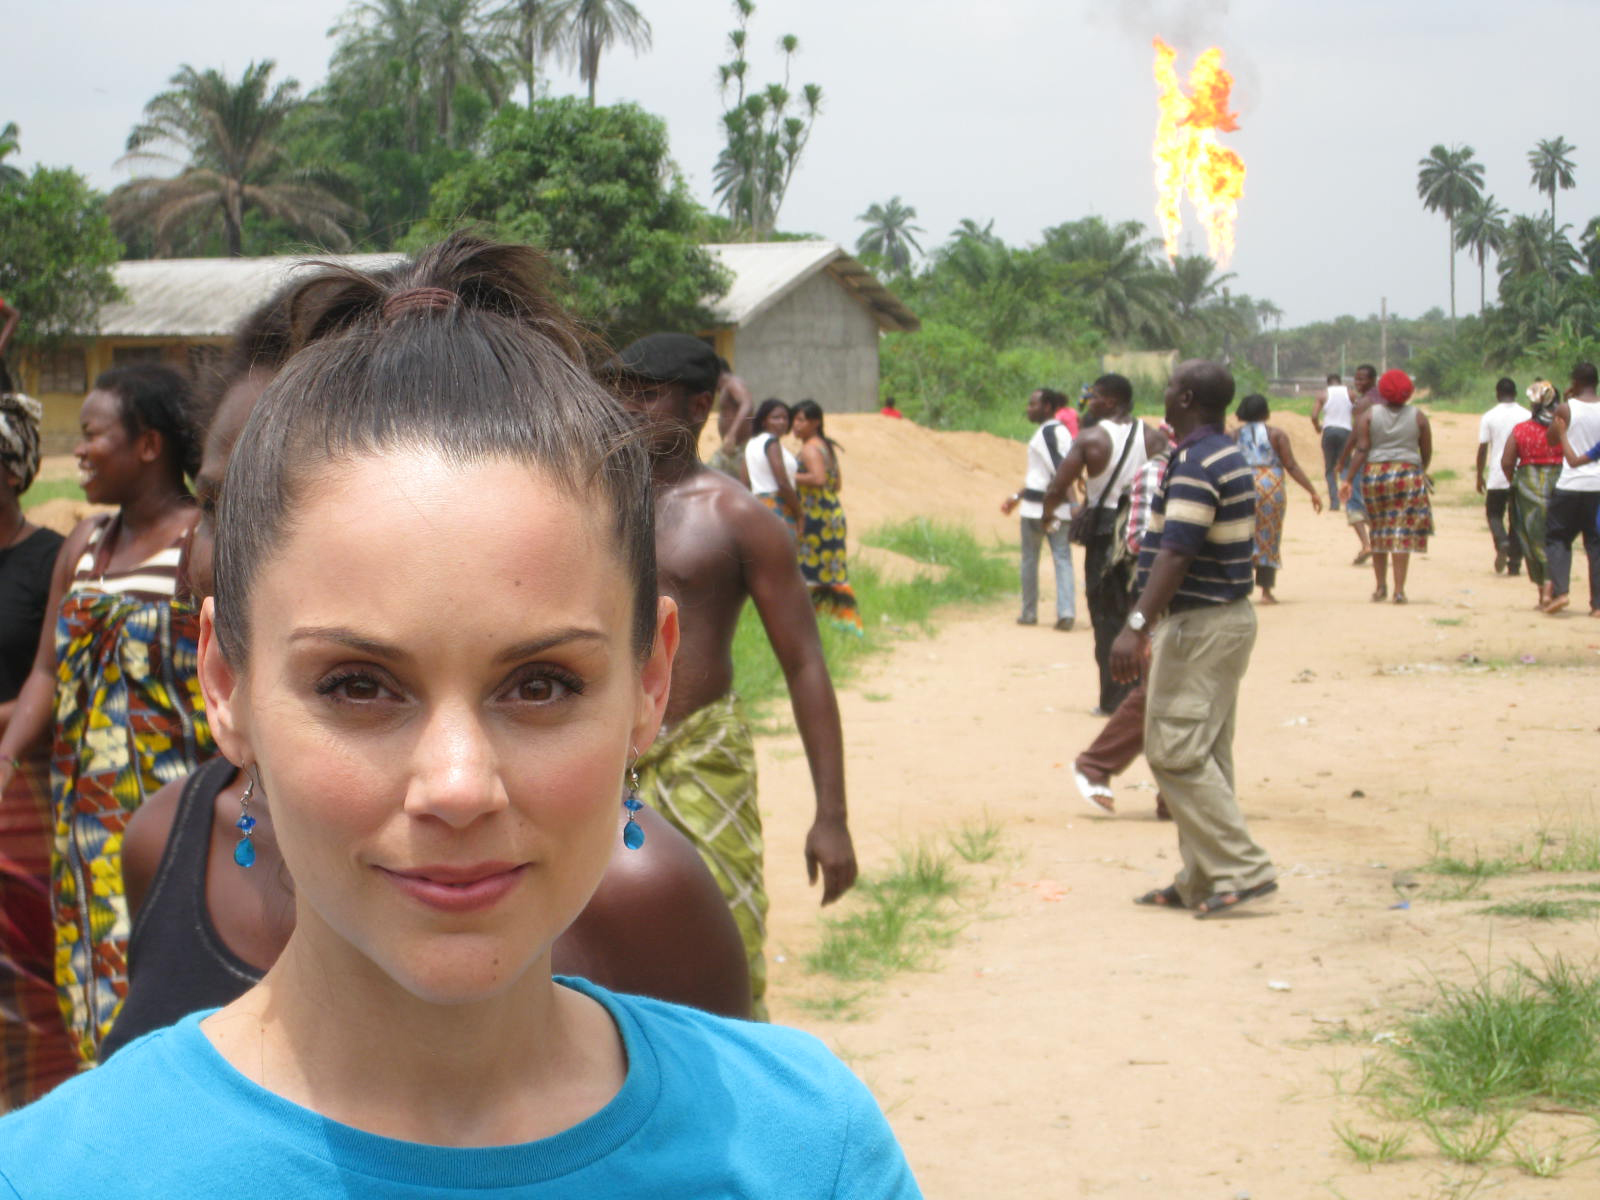 Feature film shoot on location in a village in the Niger Delta with real gas flares in the background. April 13, 2011